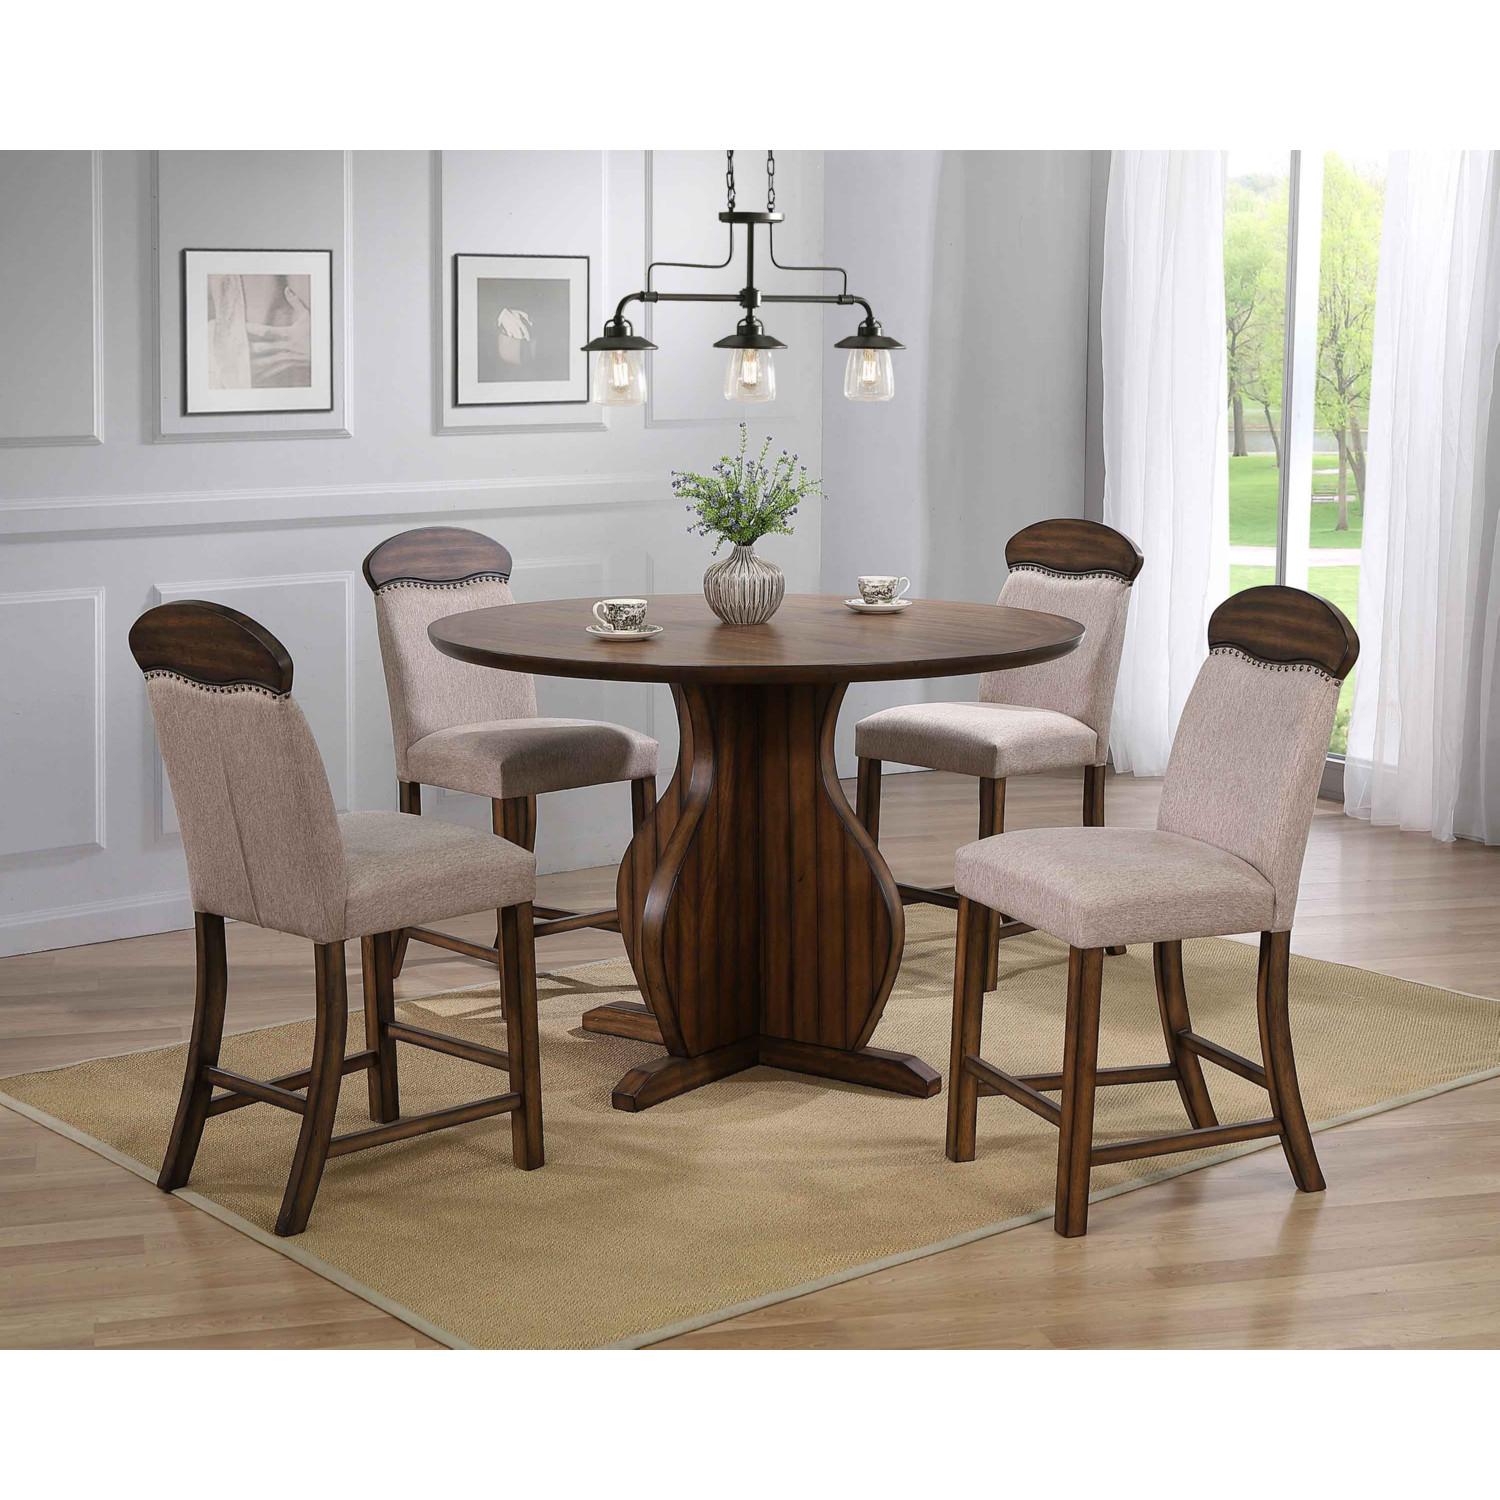 Traditional Counter Dining Set Maurice 72460-5pcs in Brown Oak 